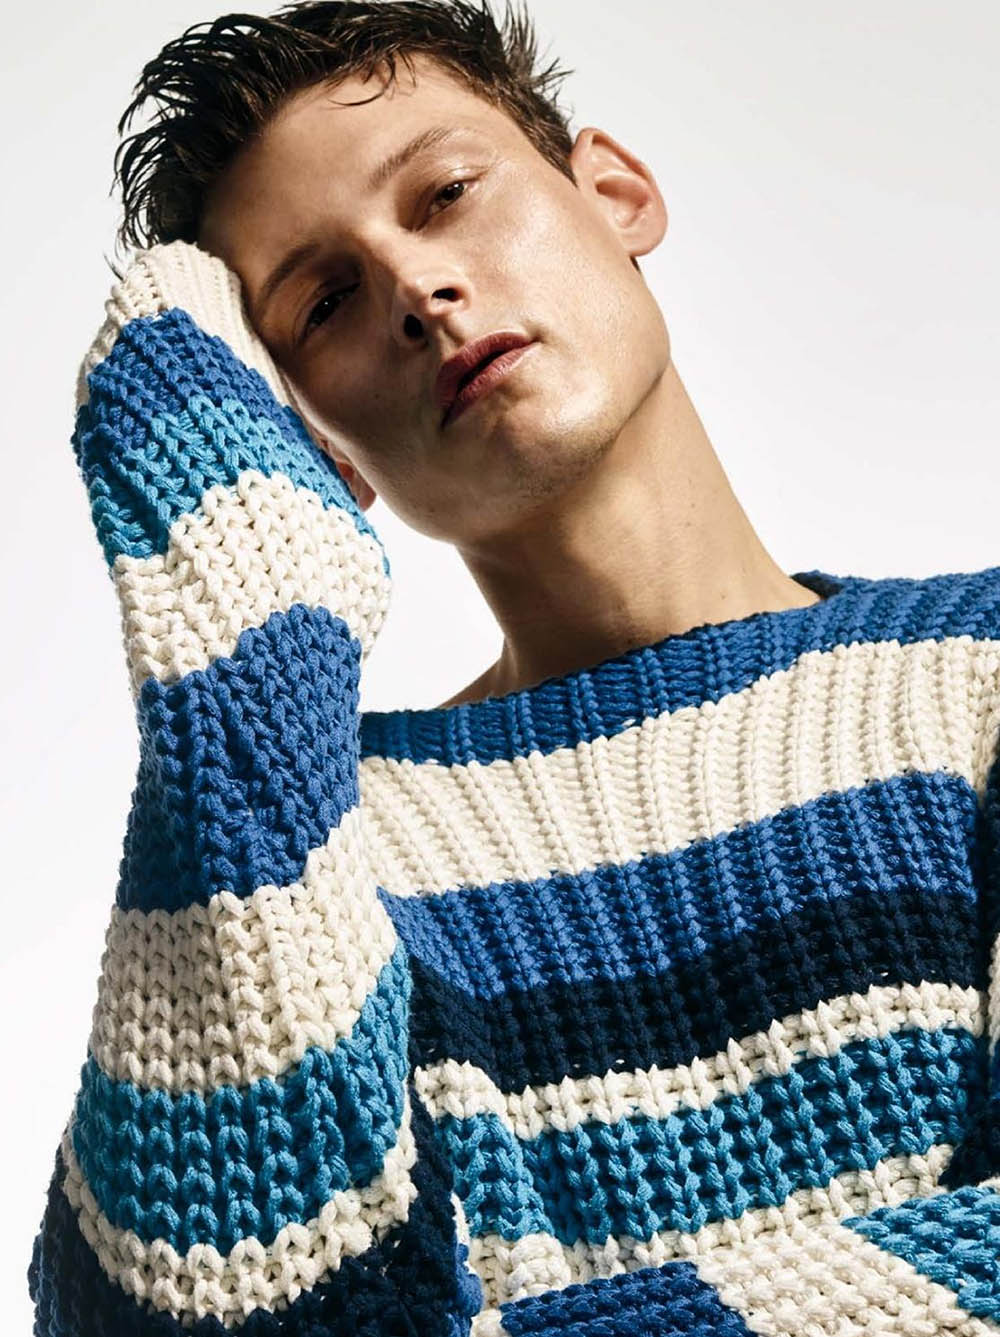 Adam Butcher by Jean-Claude Lussier for Dressed to Kill Men Spring/Summer 2020